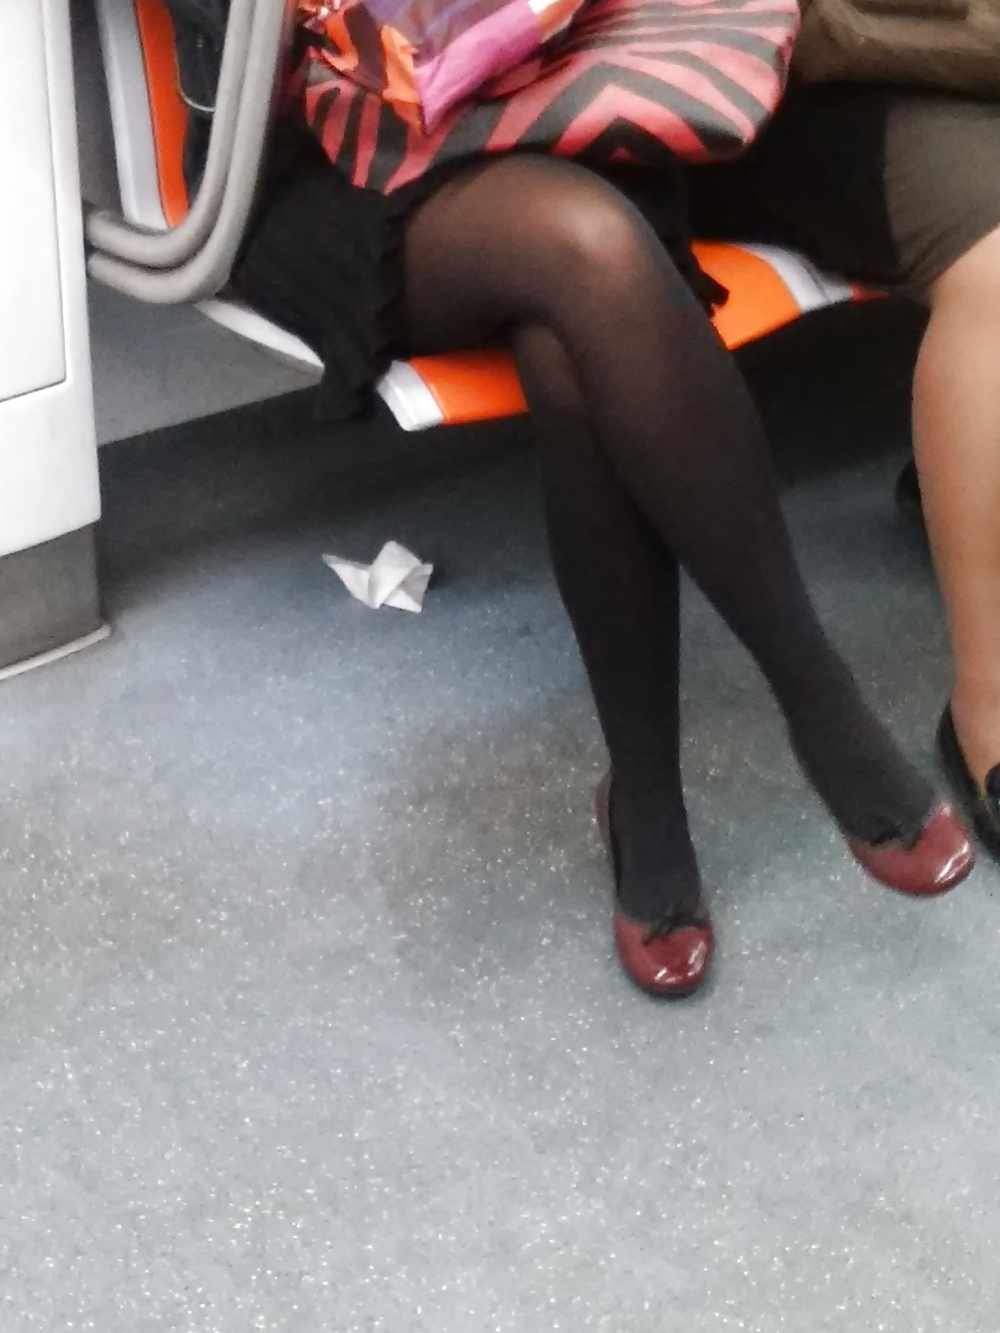 Italian (MILF) woman photographed in the subway (Italy) 2 #31402438